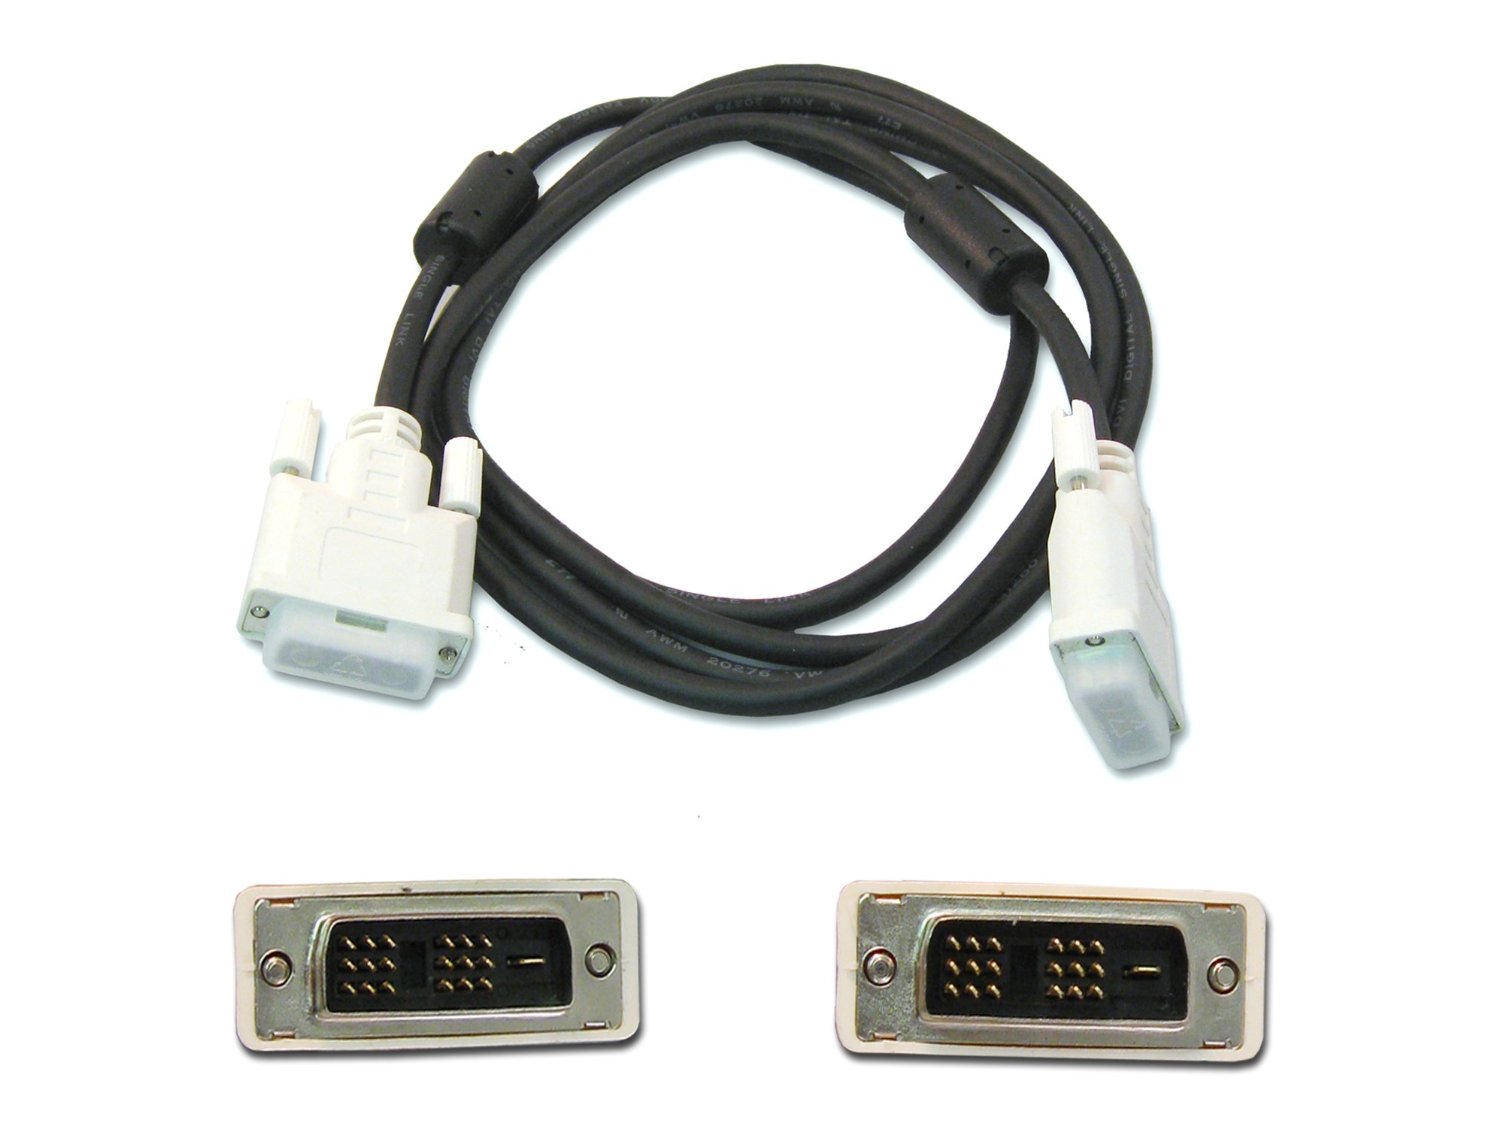 https://www.xgamertechnologies.com/images/products/DVI to DVI cable Male-Male.jpg